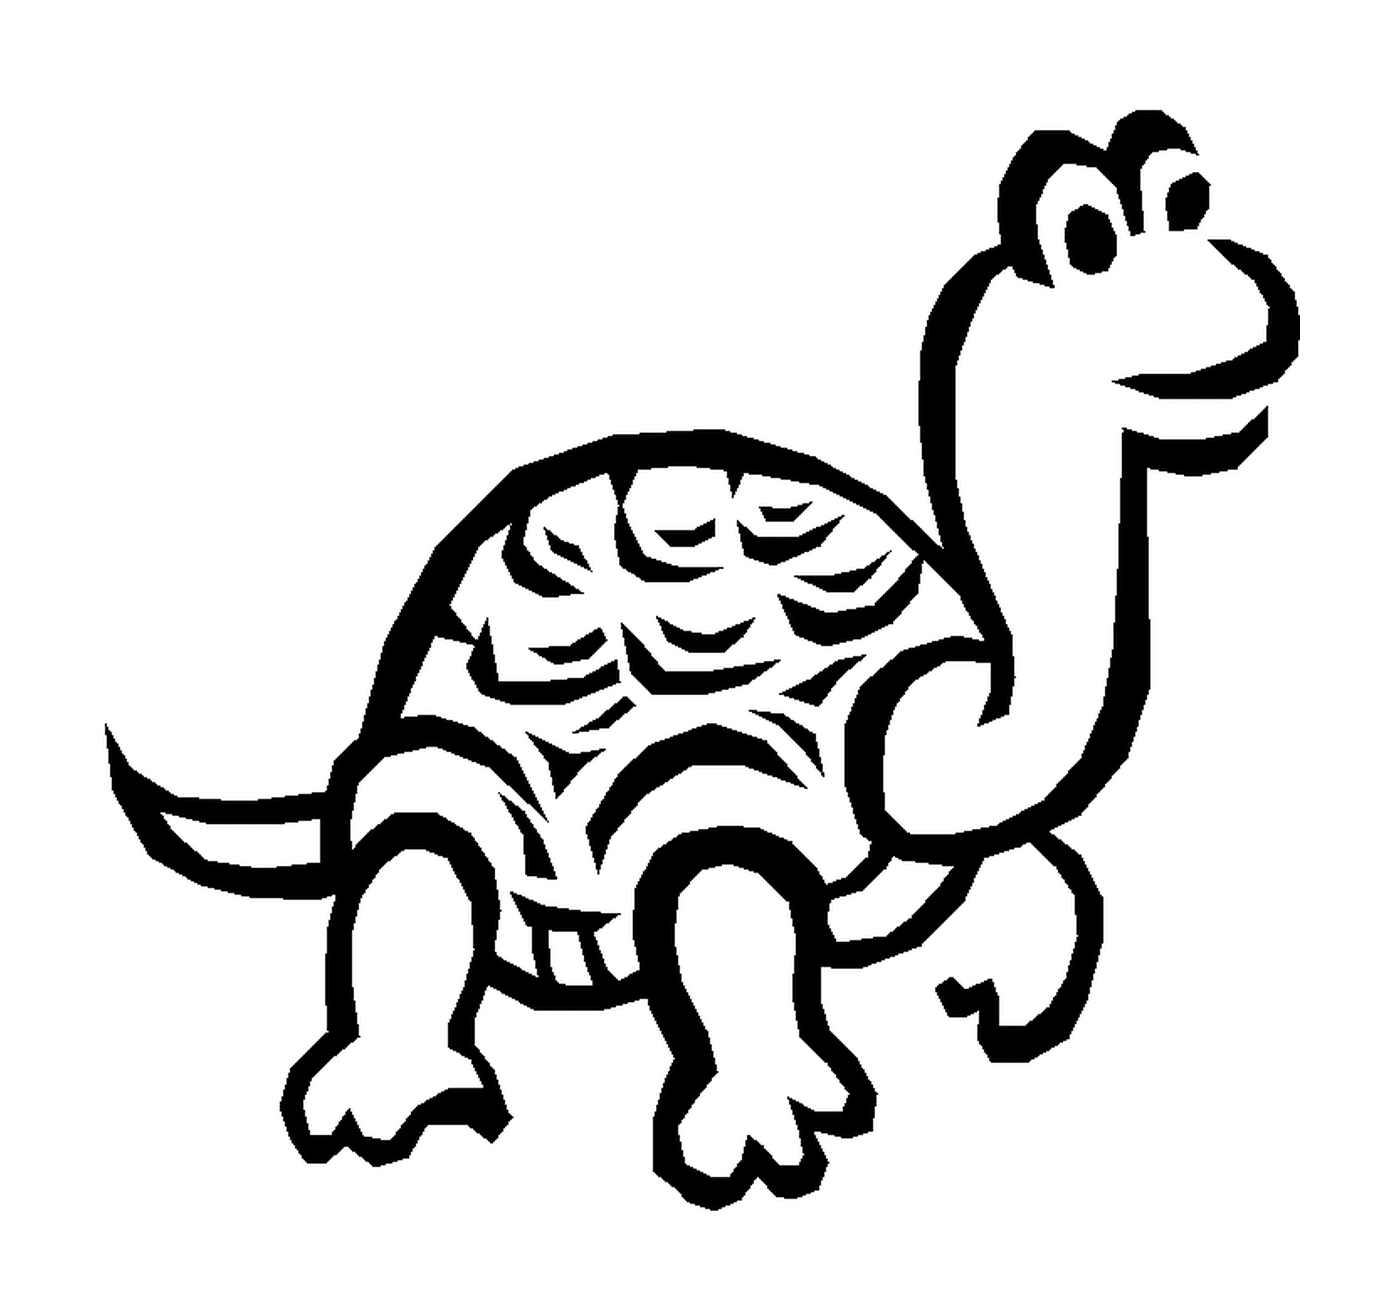  Turtle with a large neck 